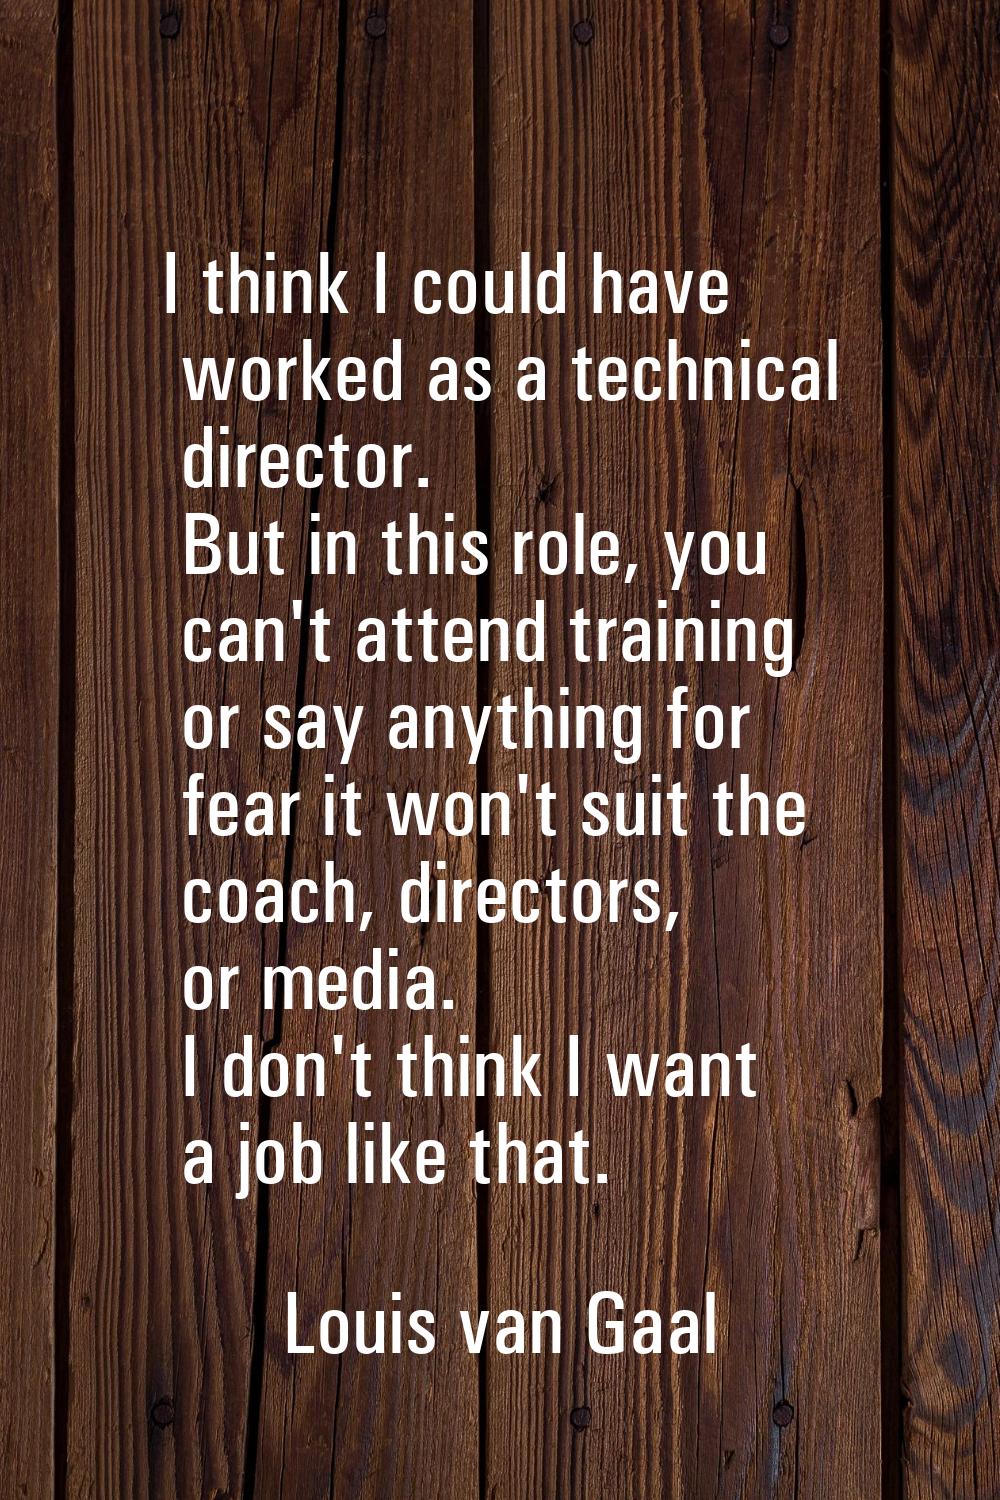 I think I could have worked as a technical director. But in this role, you can't attend training or